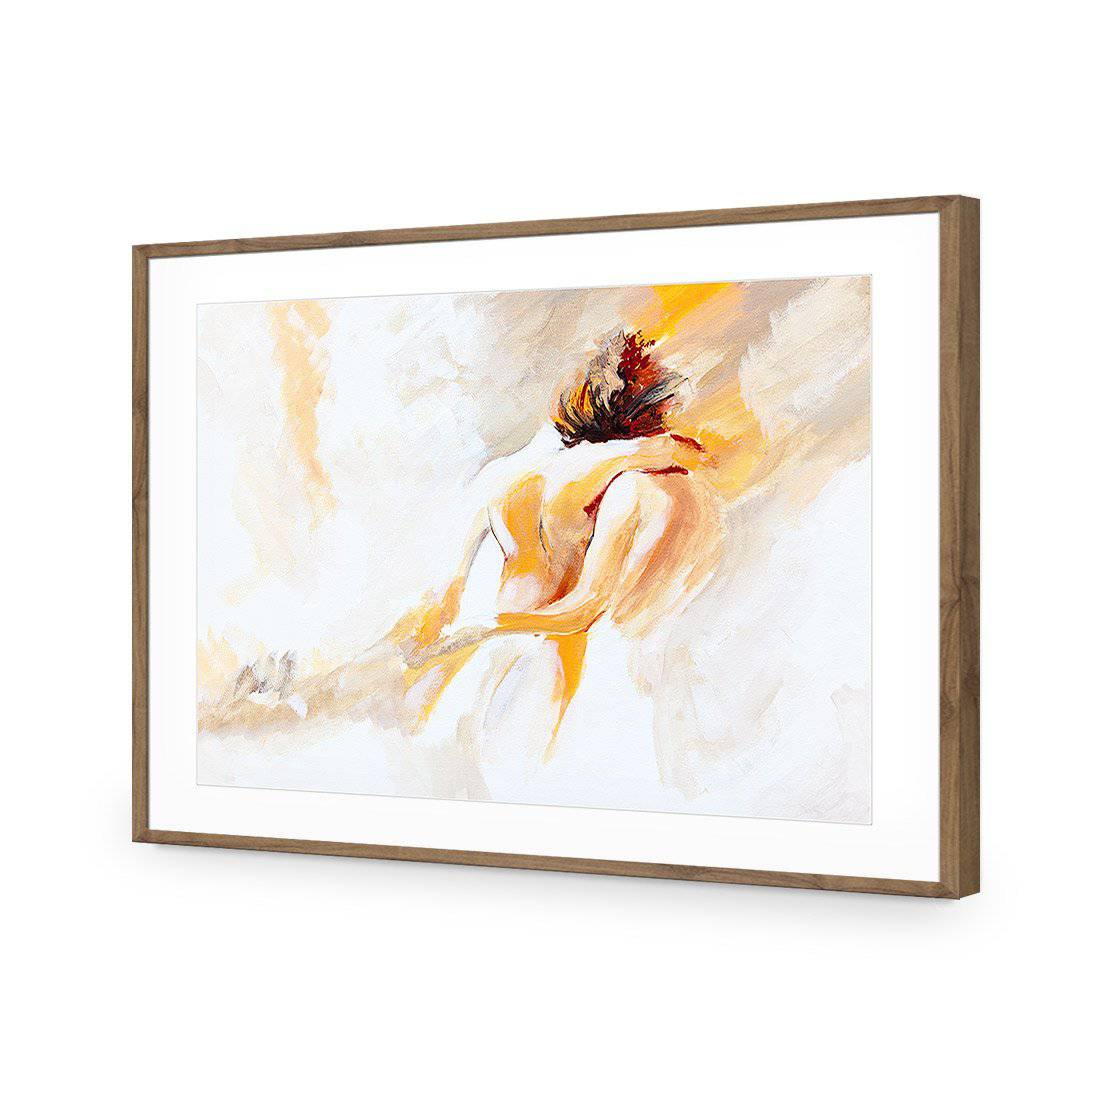 Naked Emotion-Acrylic-Wall Art Design-With Border-Acrylic - Natural Frame-45x30cm-Wall Art Designs